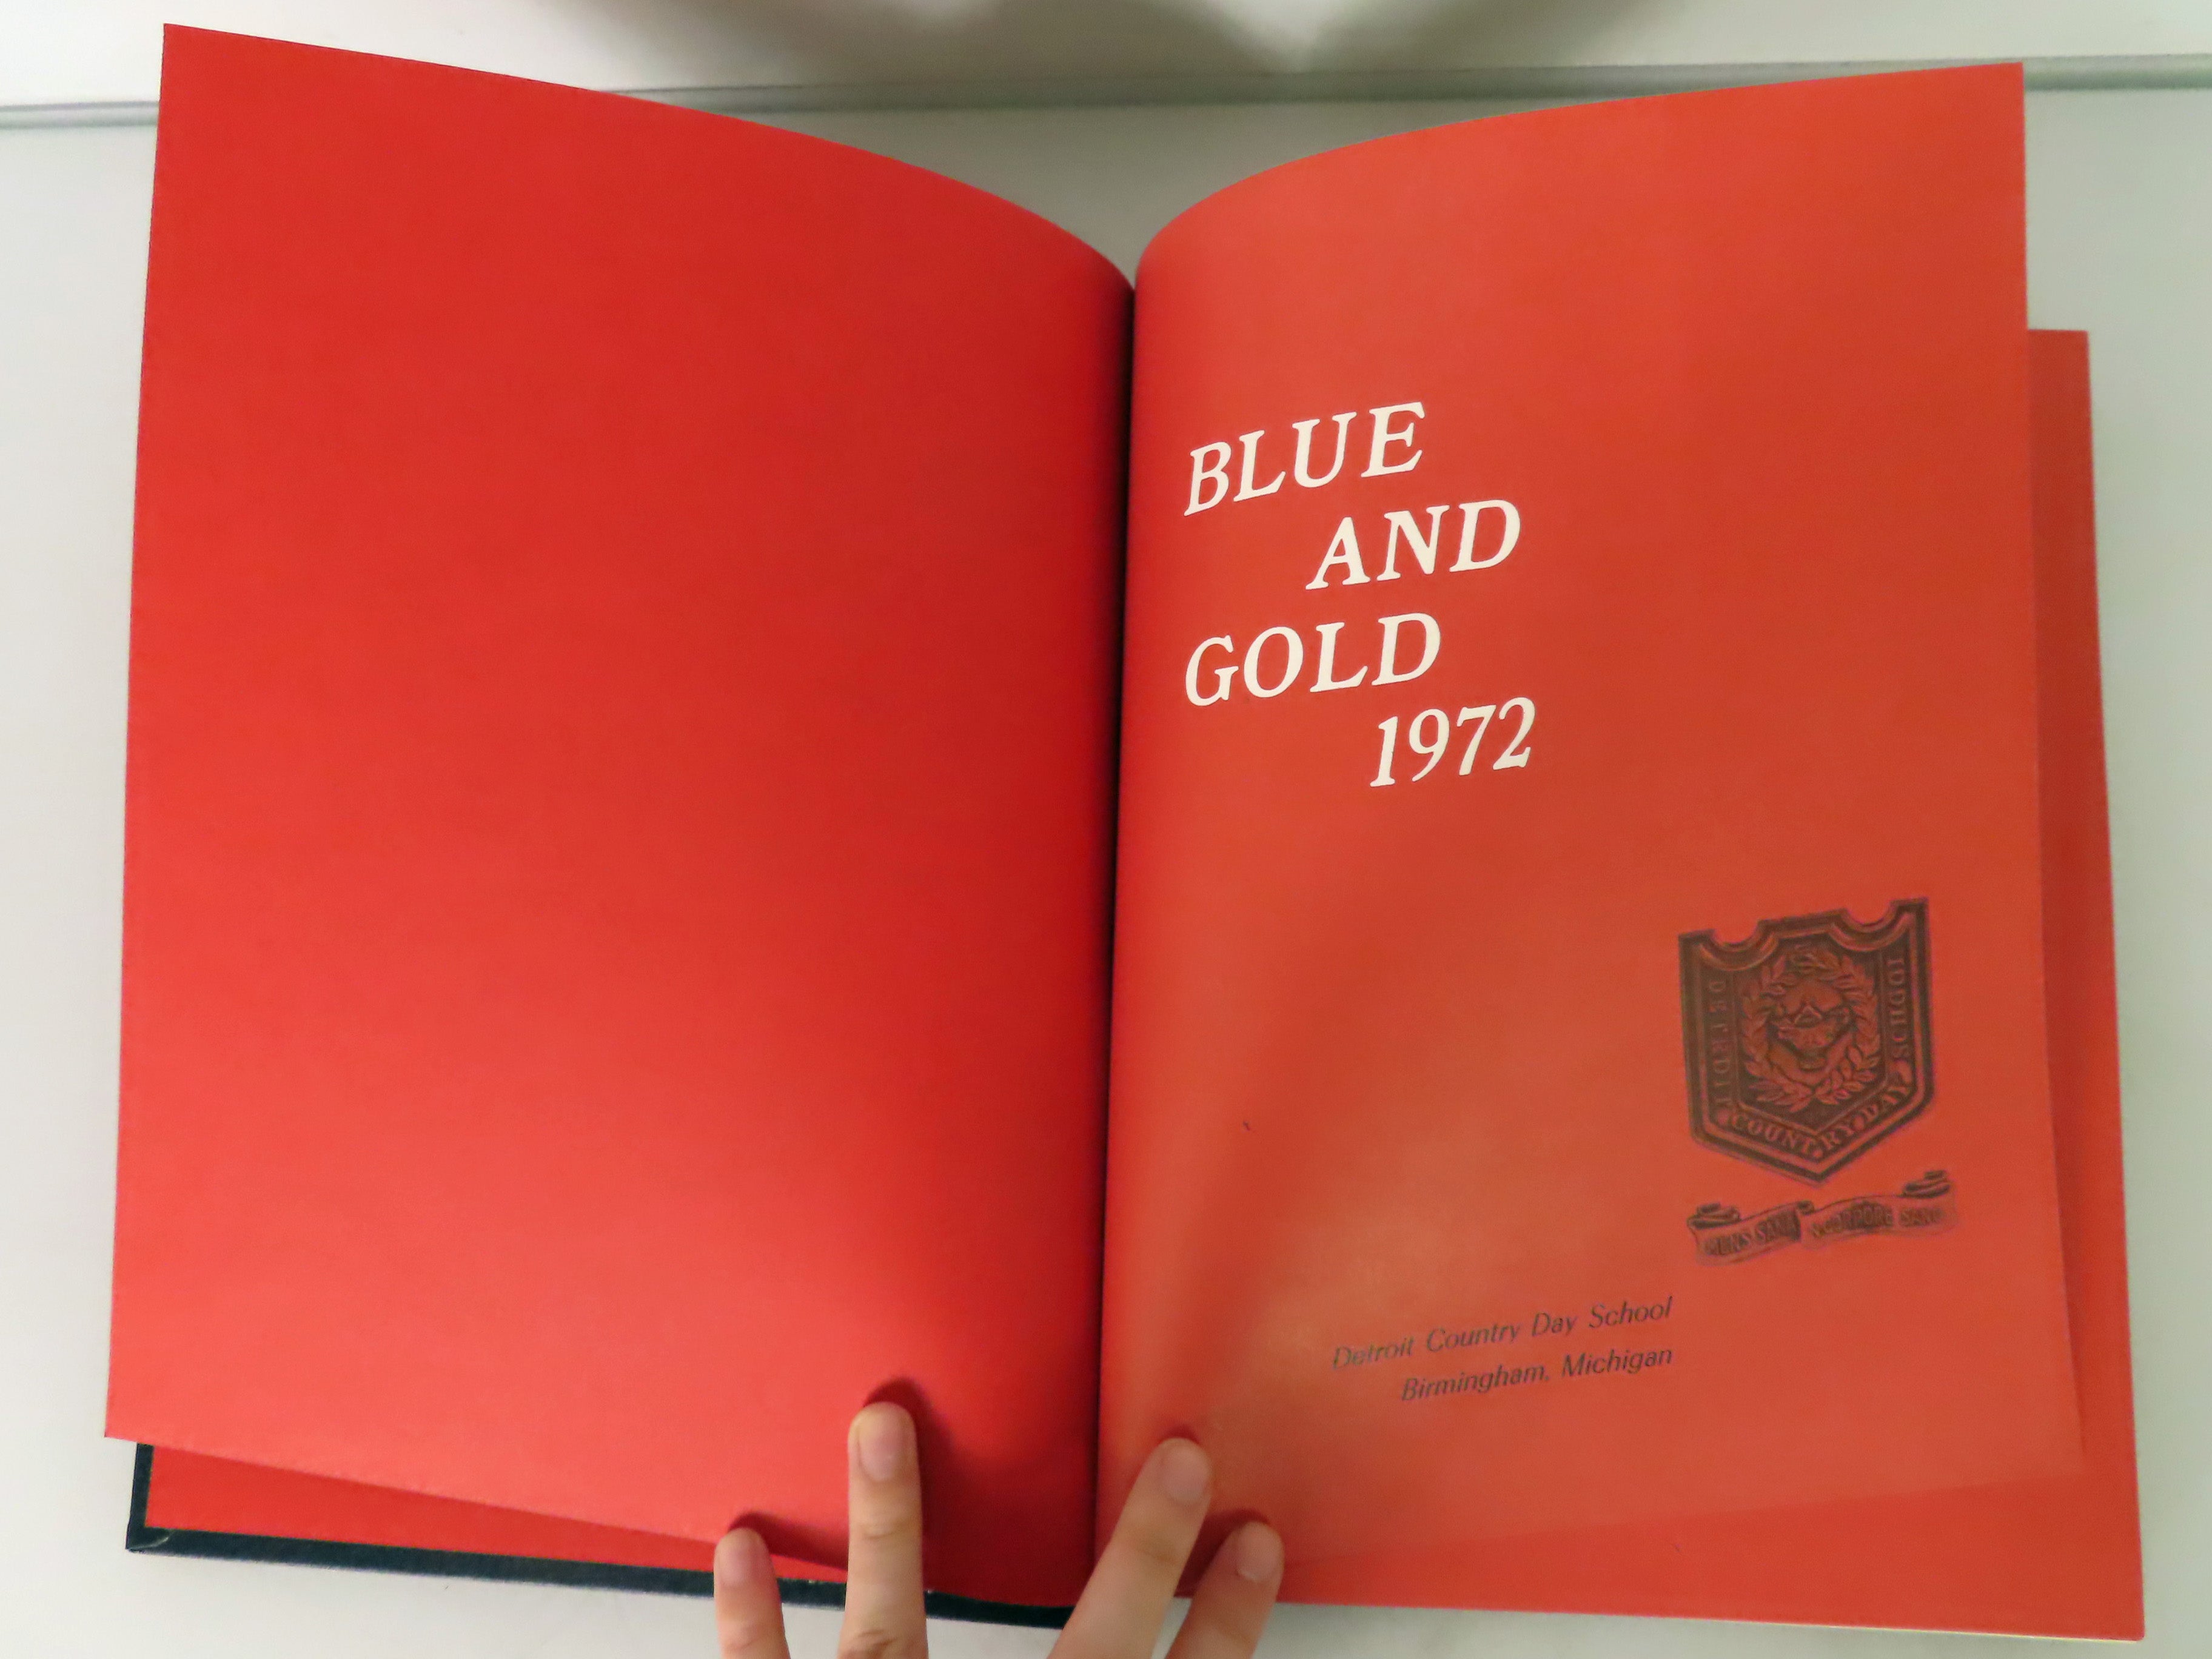 Blue and Gold 1972 Detroit Country Day School Yearbook Birmingham Michigan